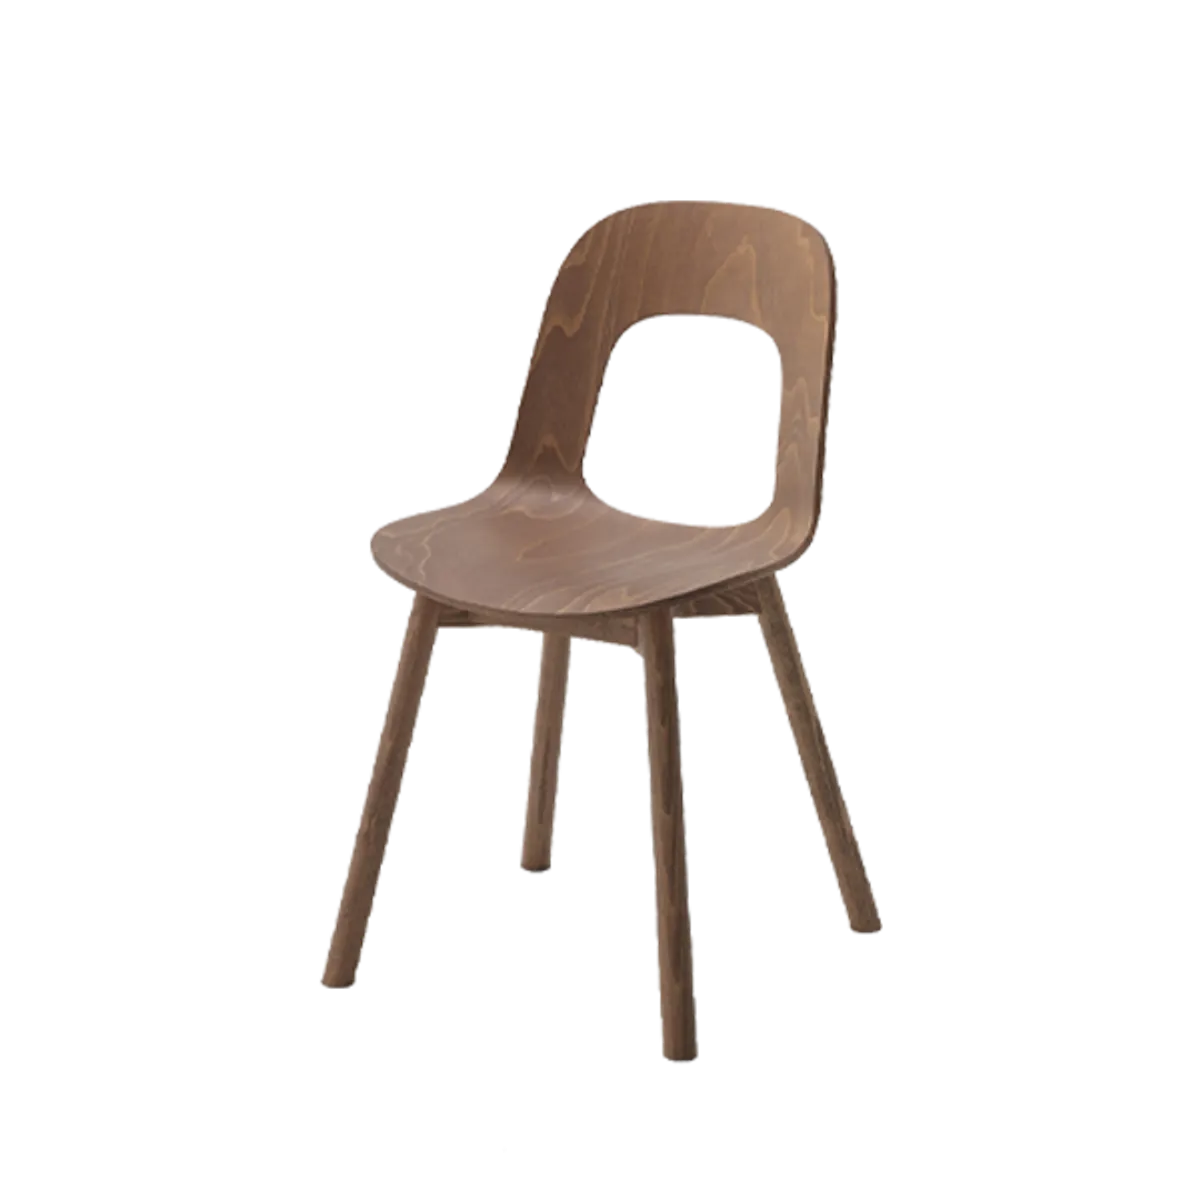 Gwen wood side chair Inside Out Contracts